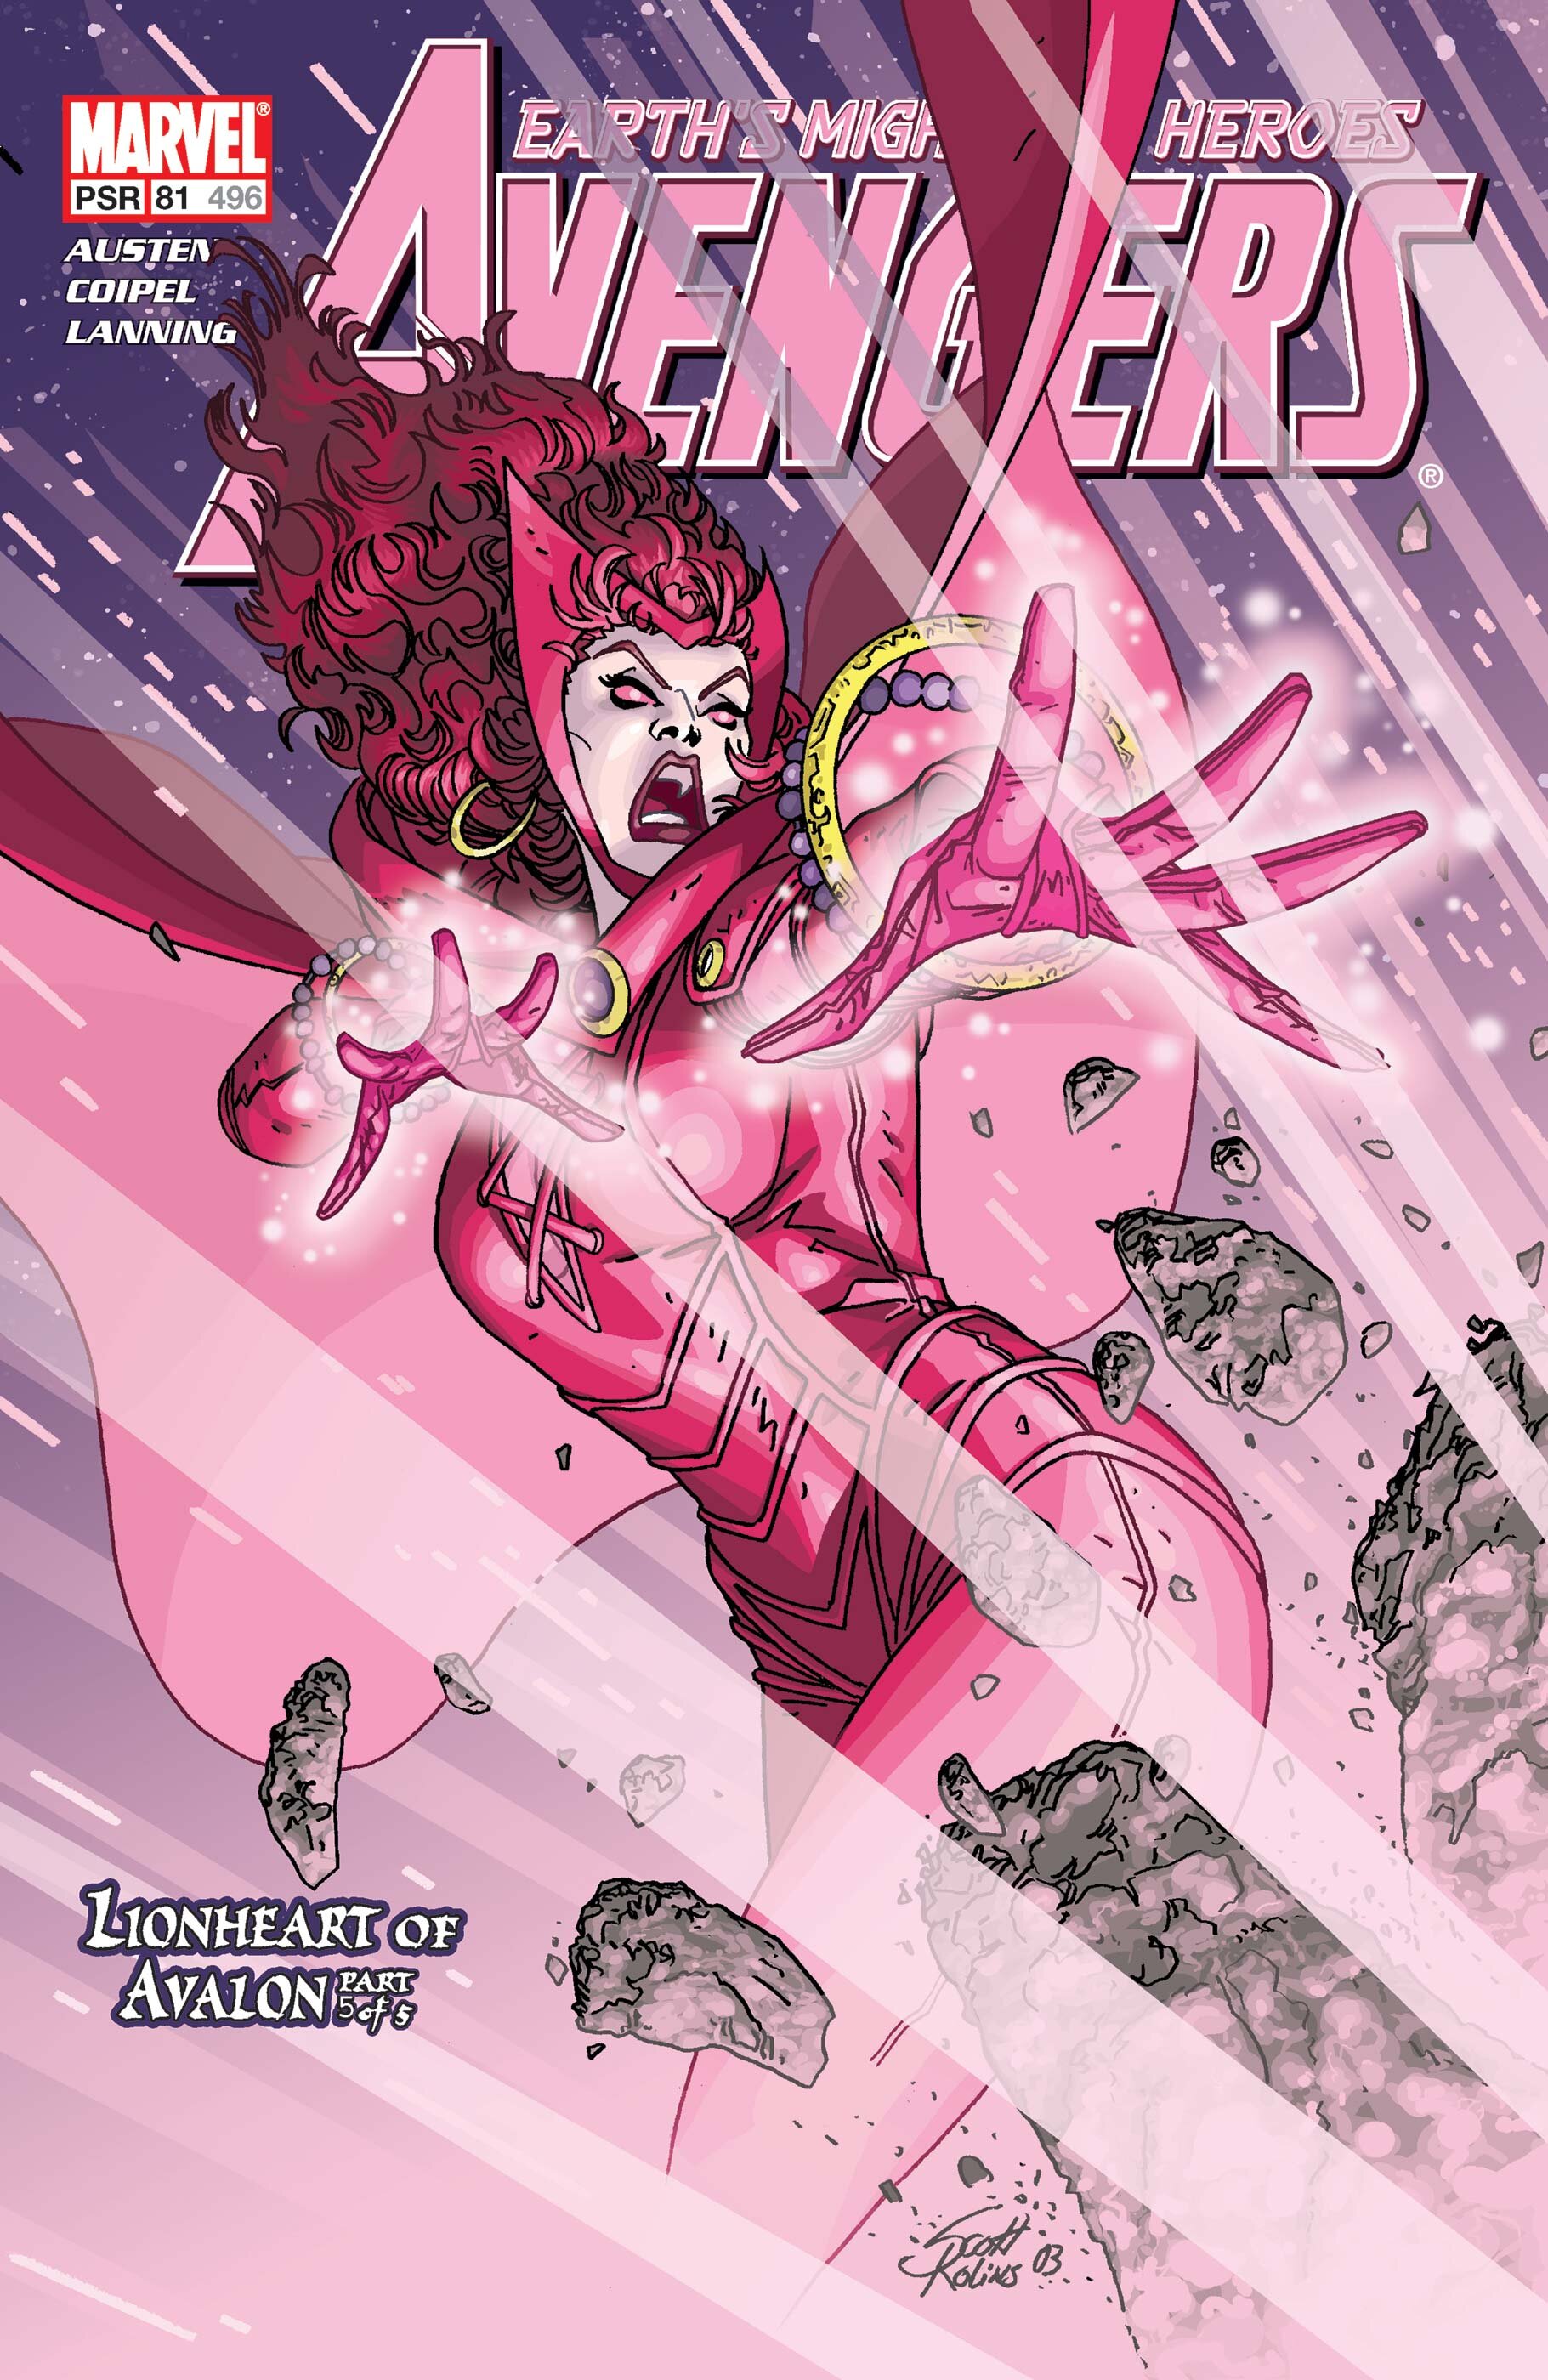 Weird Science DC Comics: Scarlet Witch #8 Review - Marvel Mondays